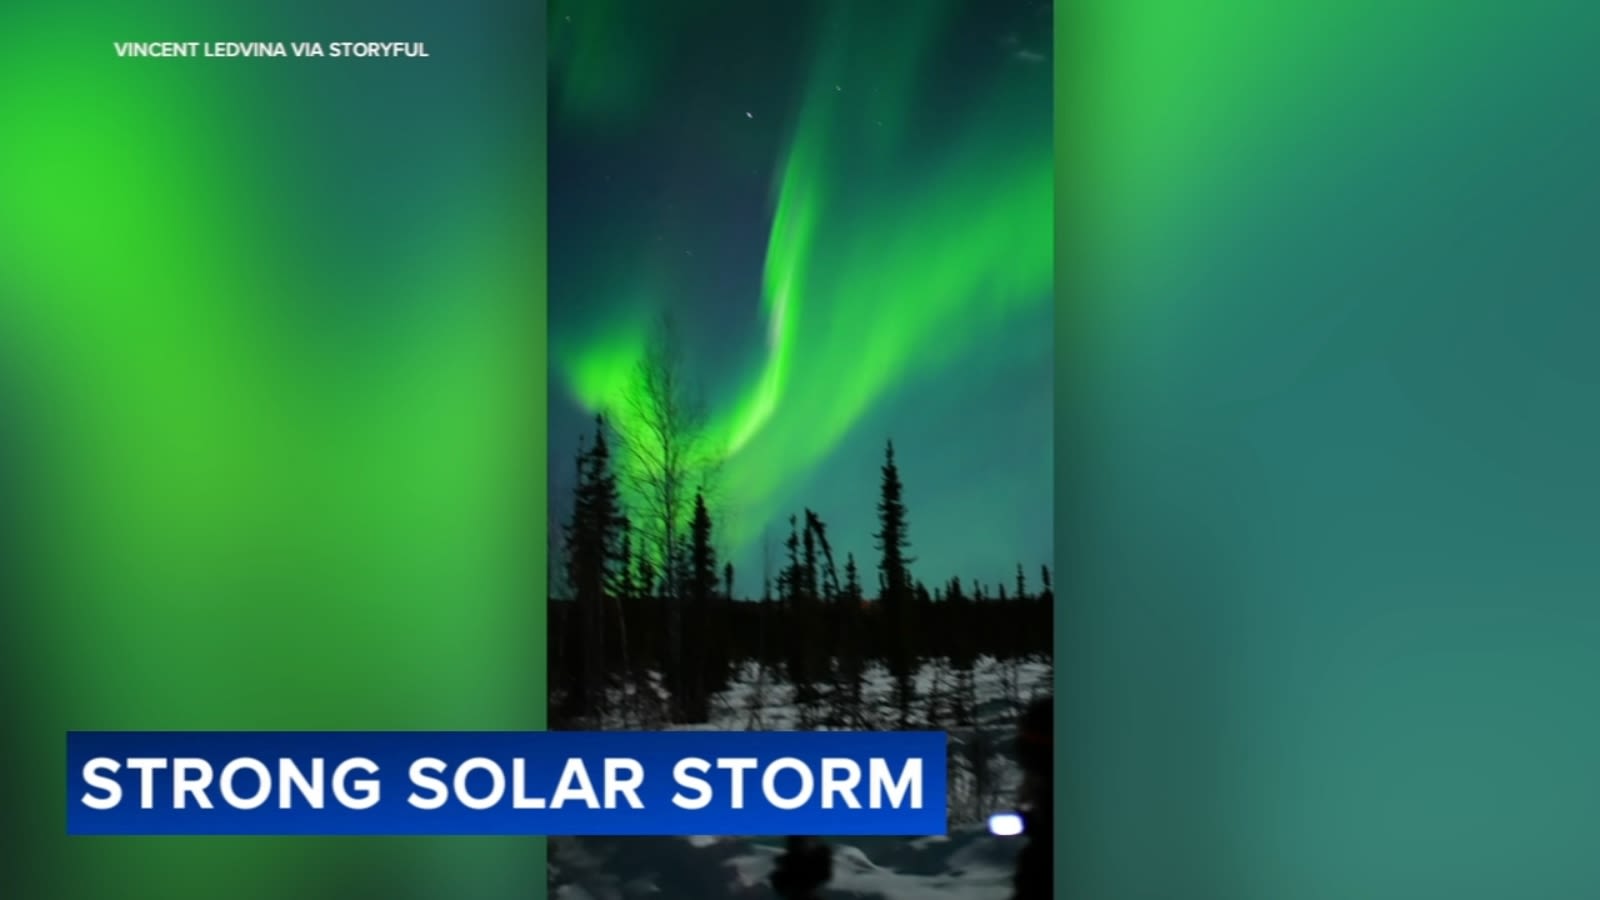 Northern Lights may be visible in parts of Chicago area tonight due to strong solar storm